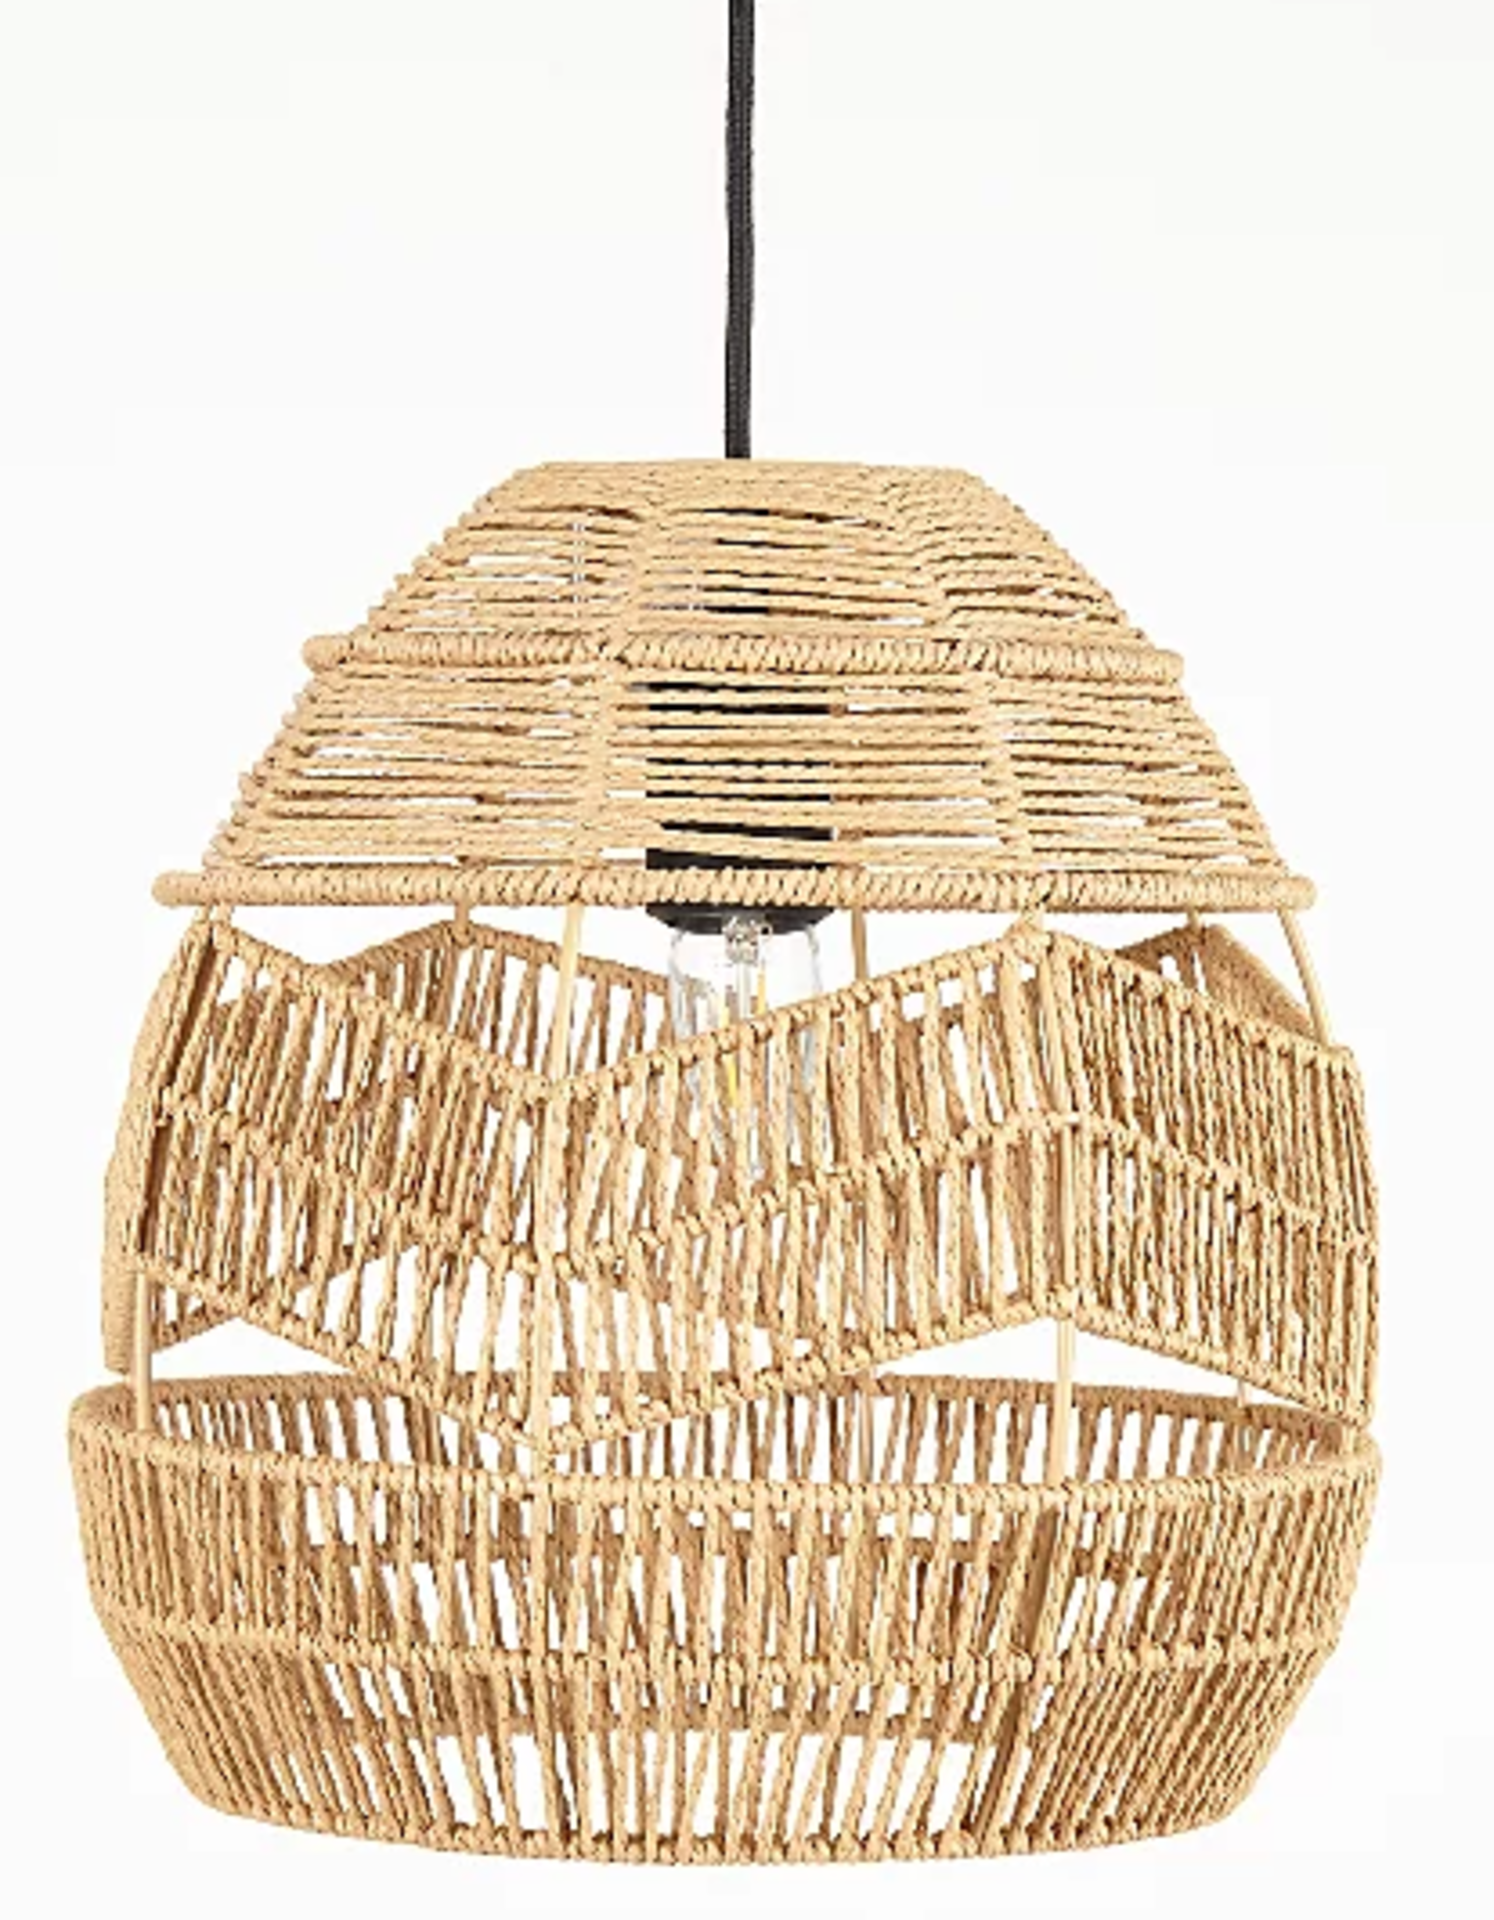 Rattan Ceiling Shade - Image 2 of 2